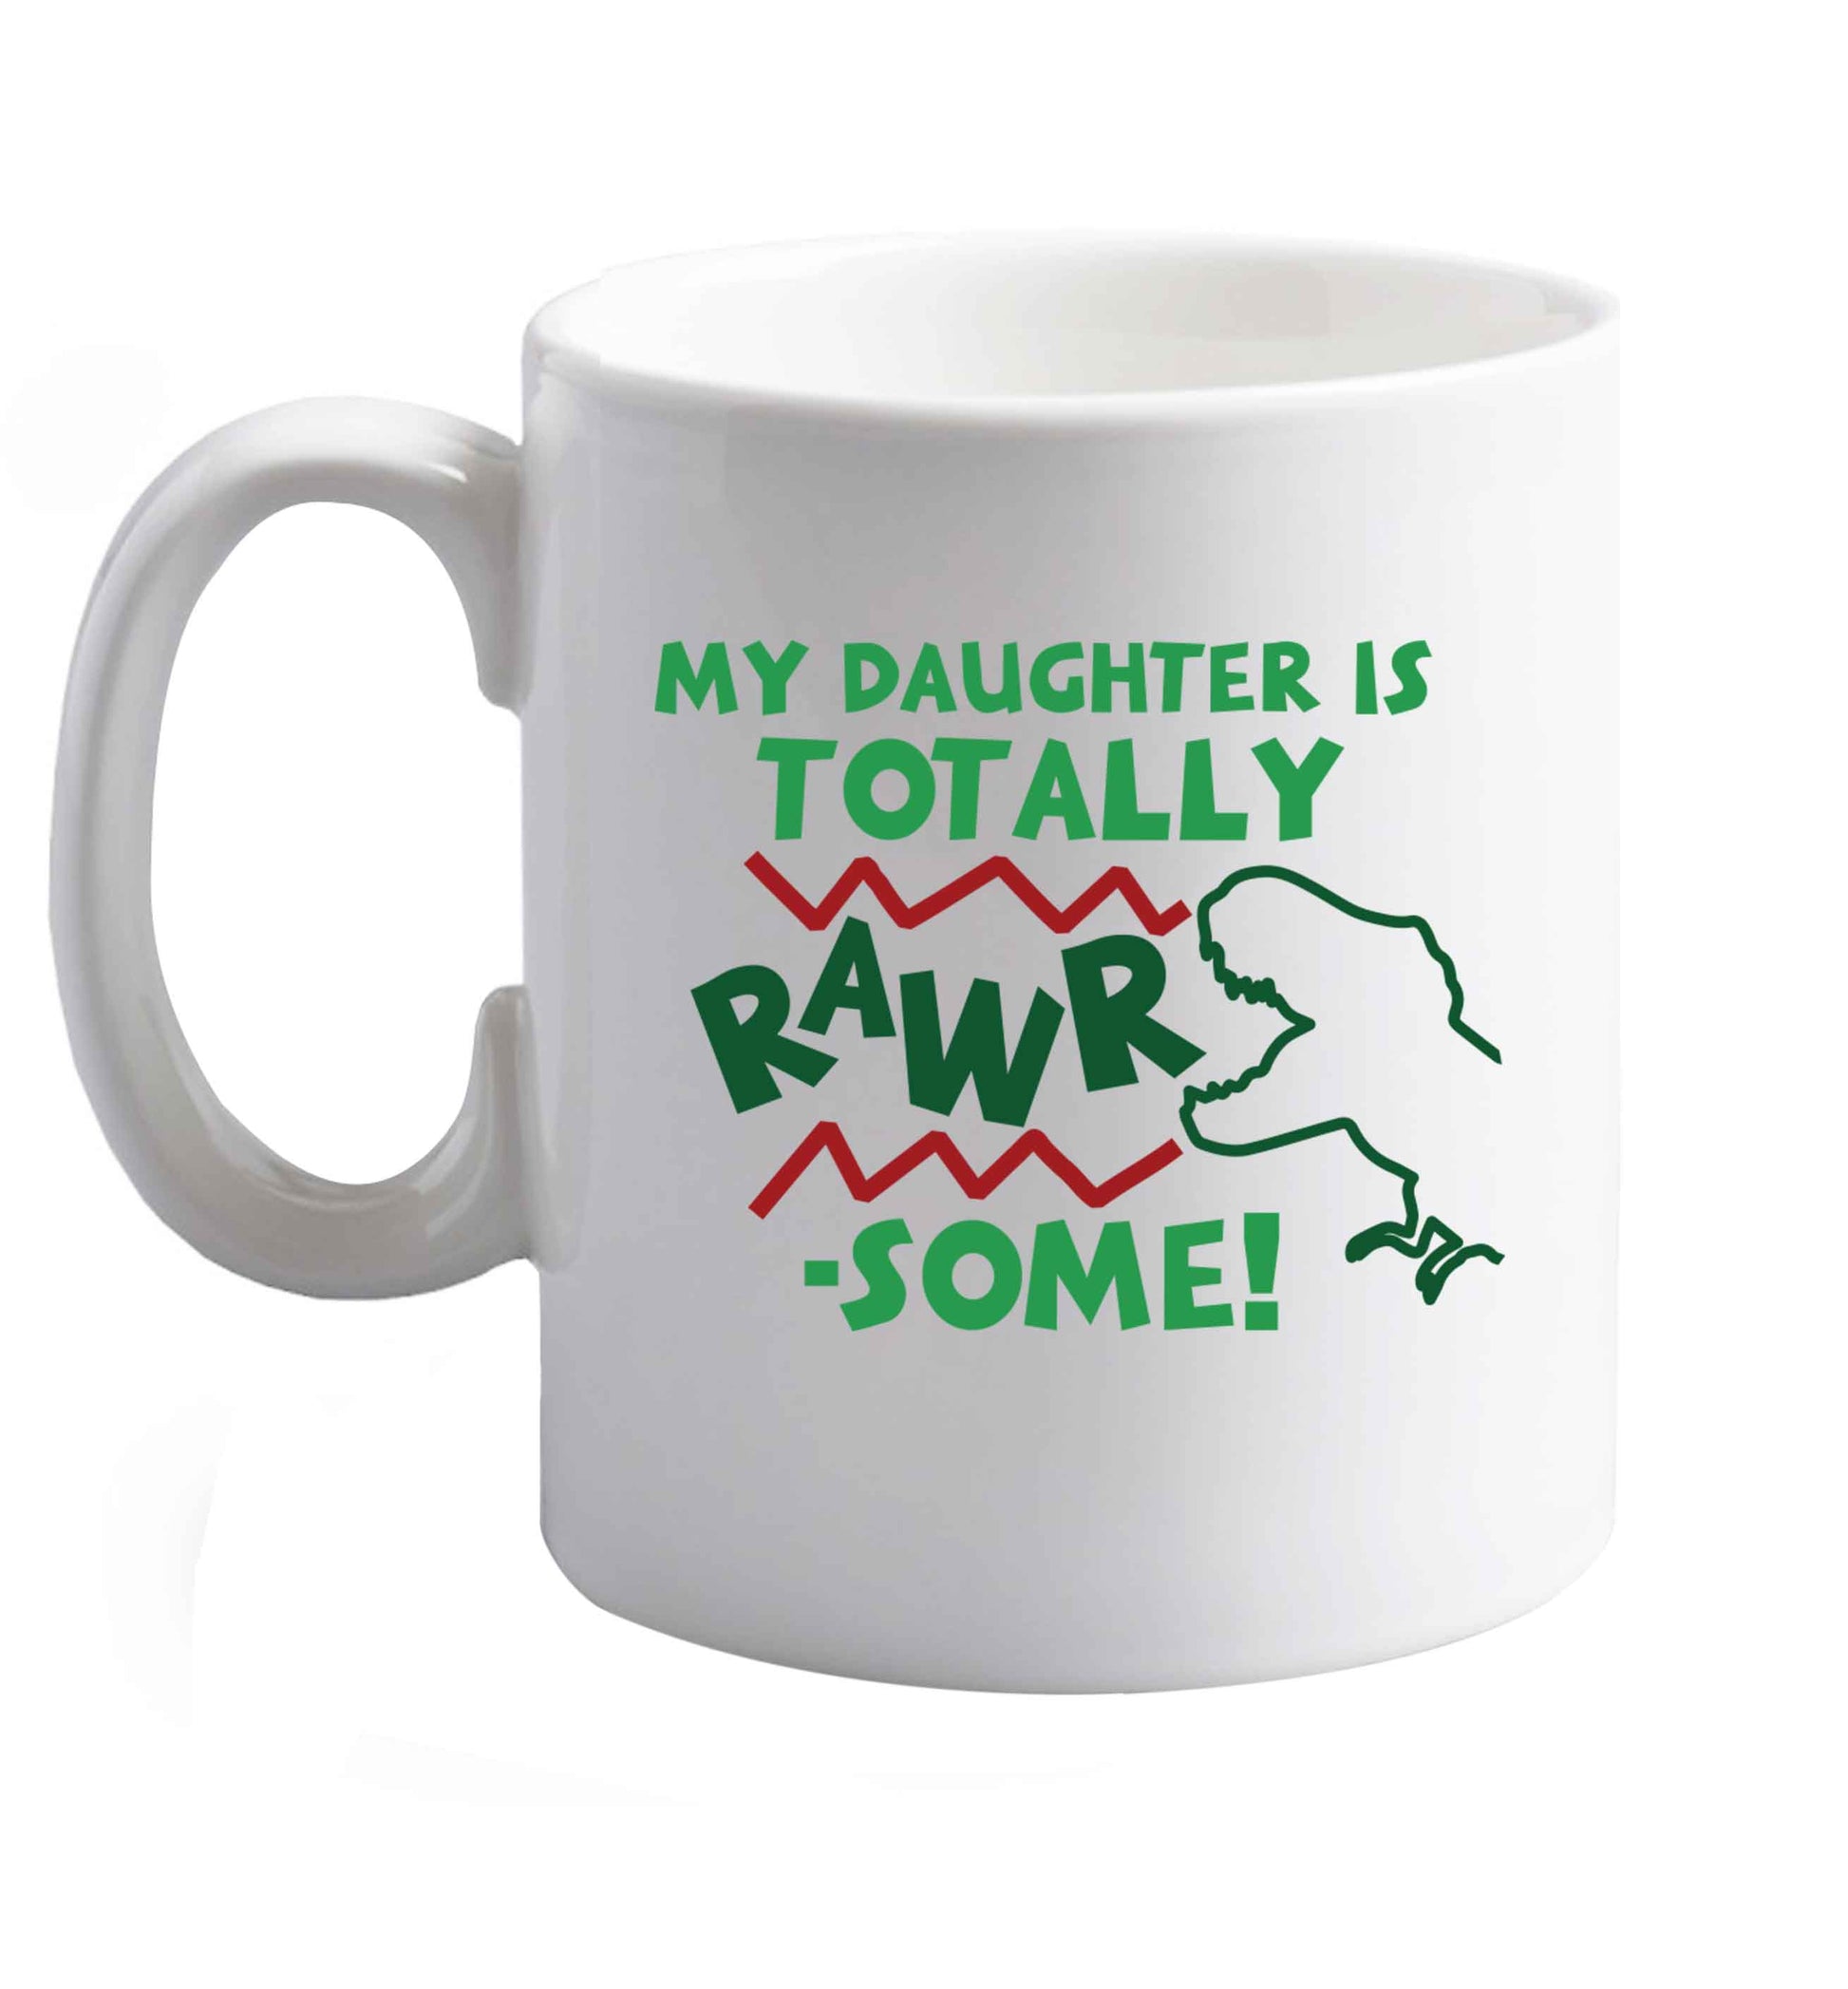 10 oz My daughter is totally rawrsome ceramic mug right handed